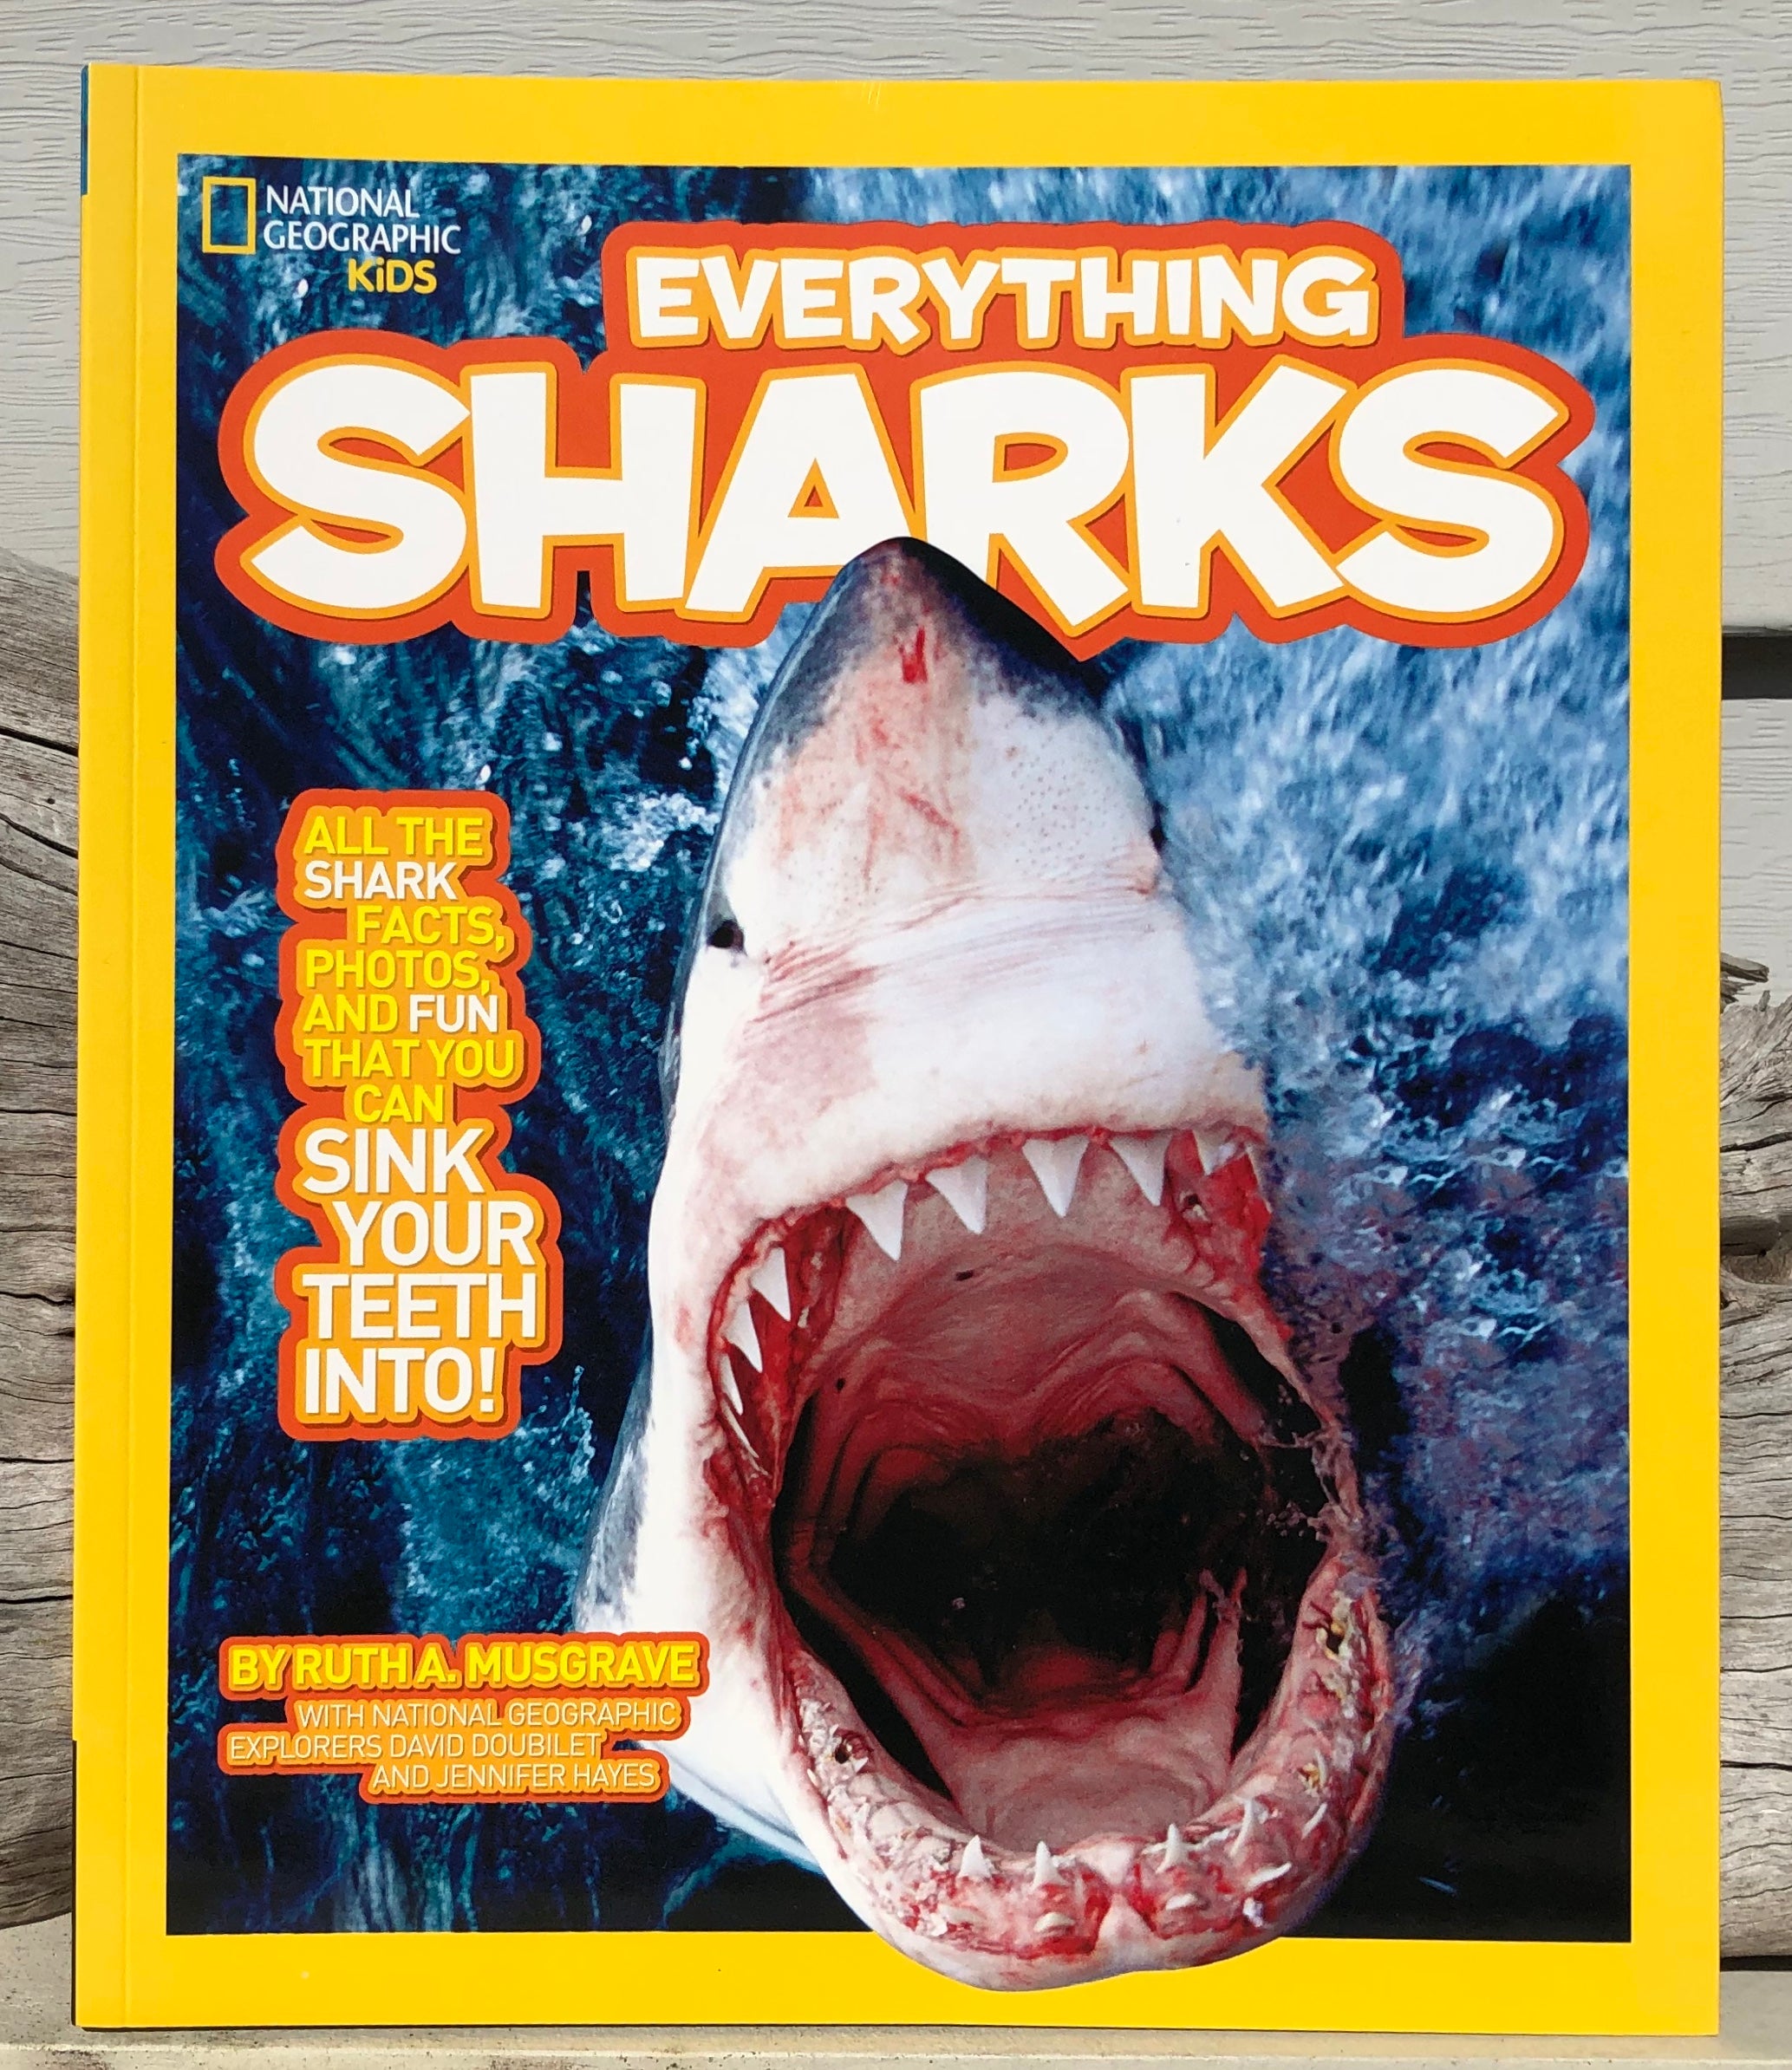 National Geographic Kids: Everything Dolphins – Shop Ding Darling